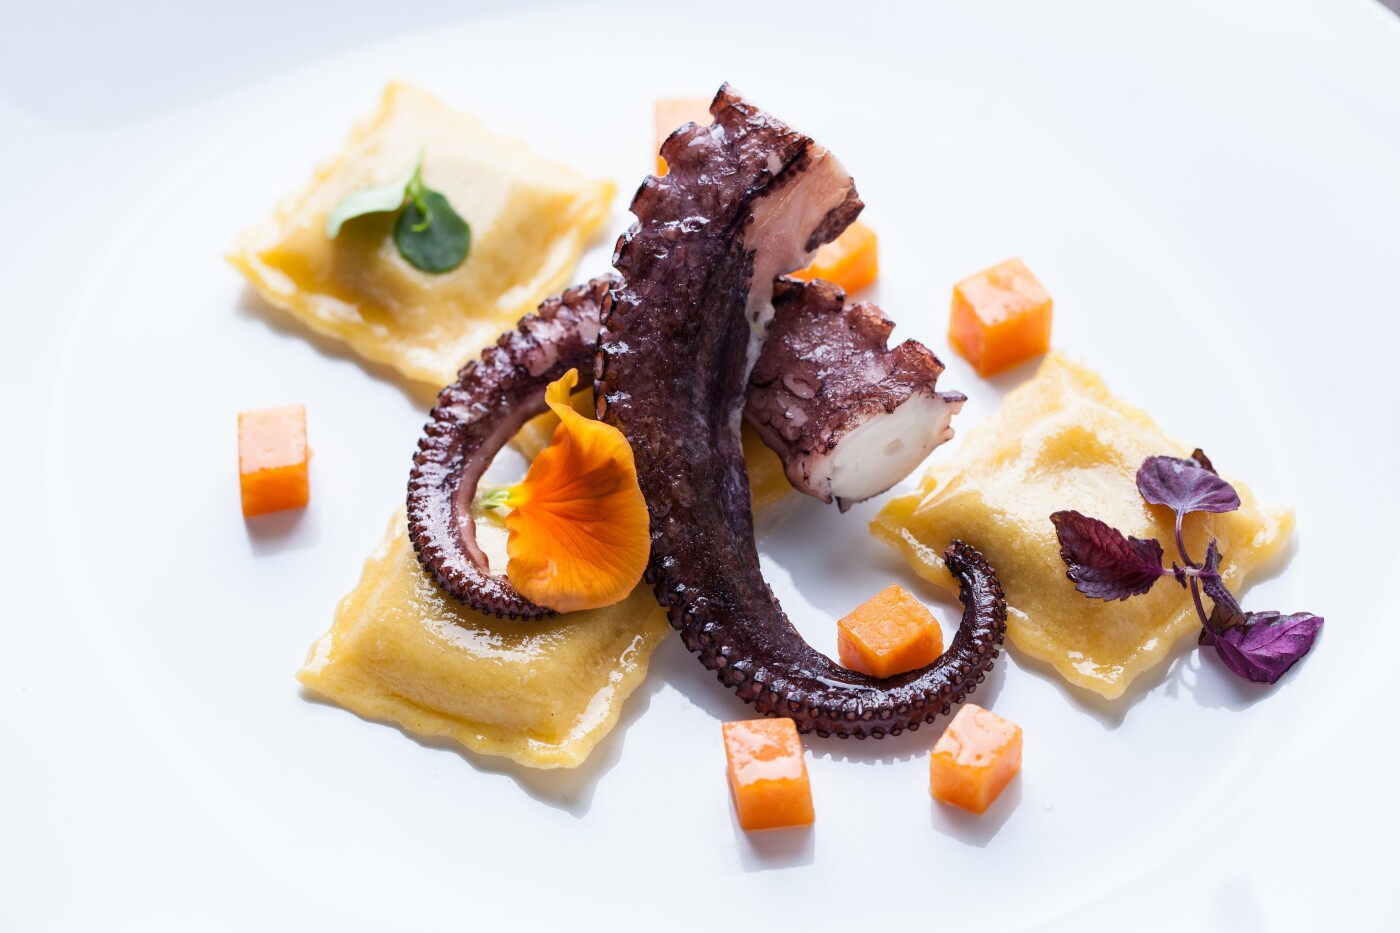 The ricotta and wild garlic ravioli with caramelised octopus are one of the signature dishes of Settimo Cielo, a restaurant in the heart of Vienna with a view to rival the beauty of its dishes.